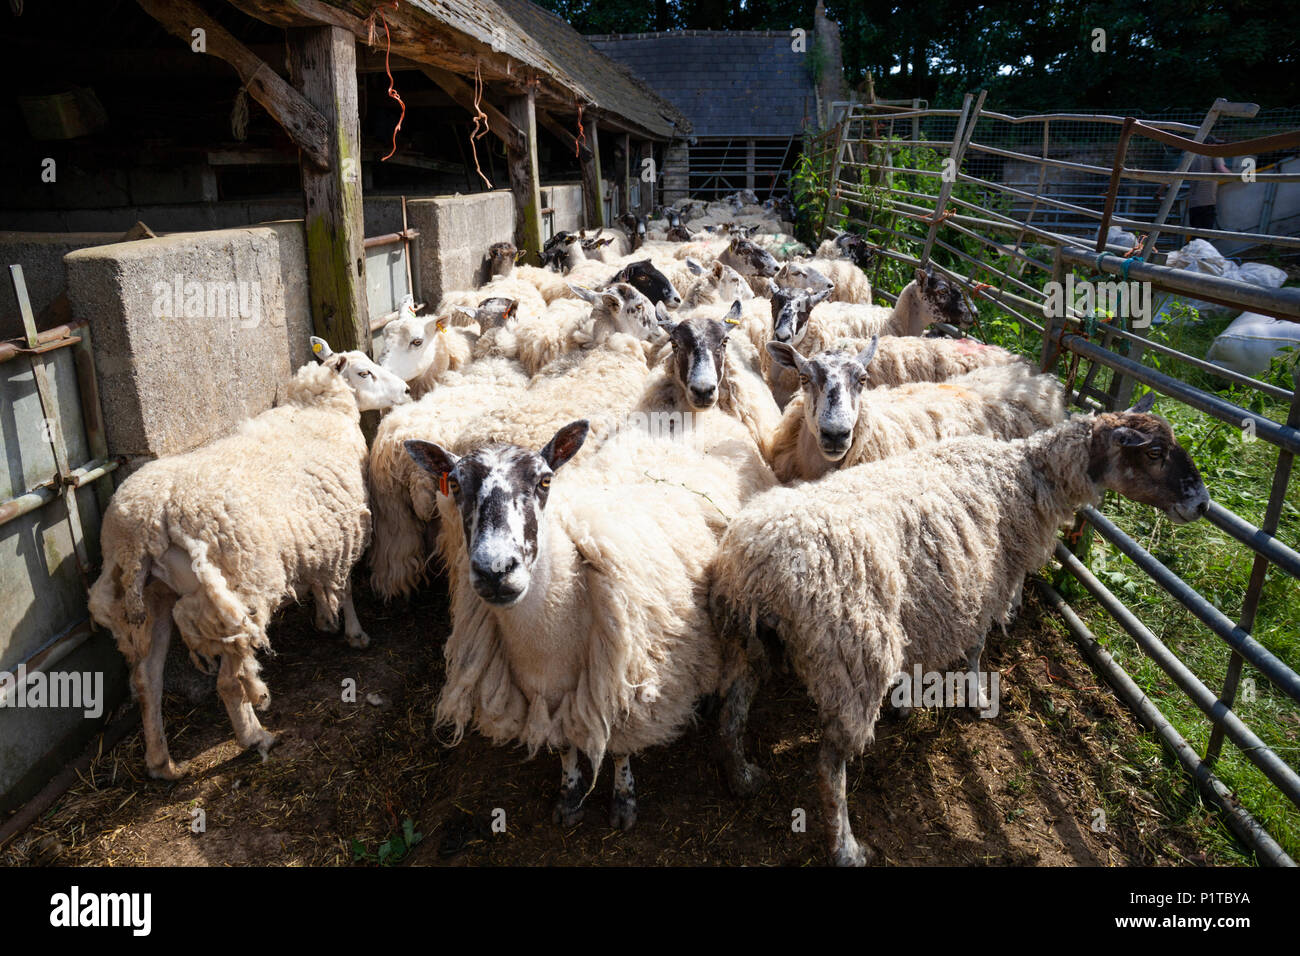 Flock of North Country Mule sheep in farmyard waiting to be sheared, Stow-on-the-Wold, Cotswolds, Gloucestershire, England, United Kingdom, Europe Stock Photo